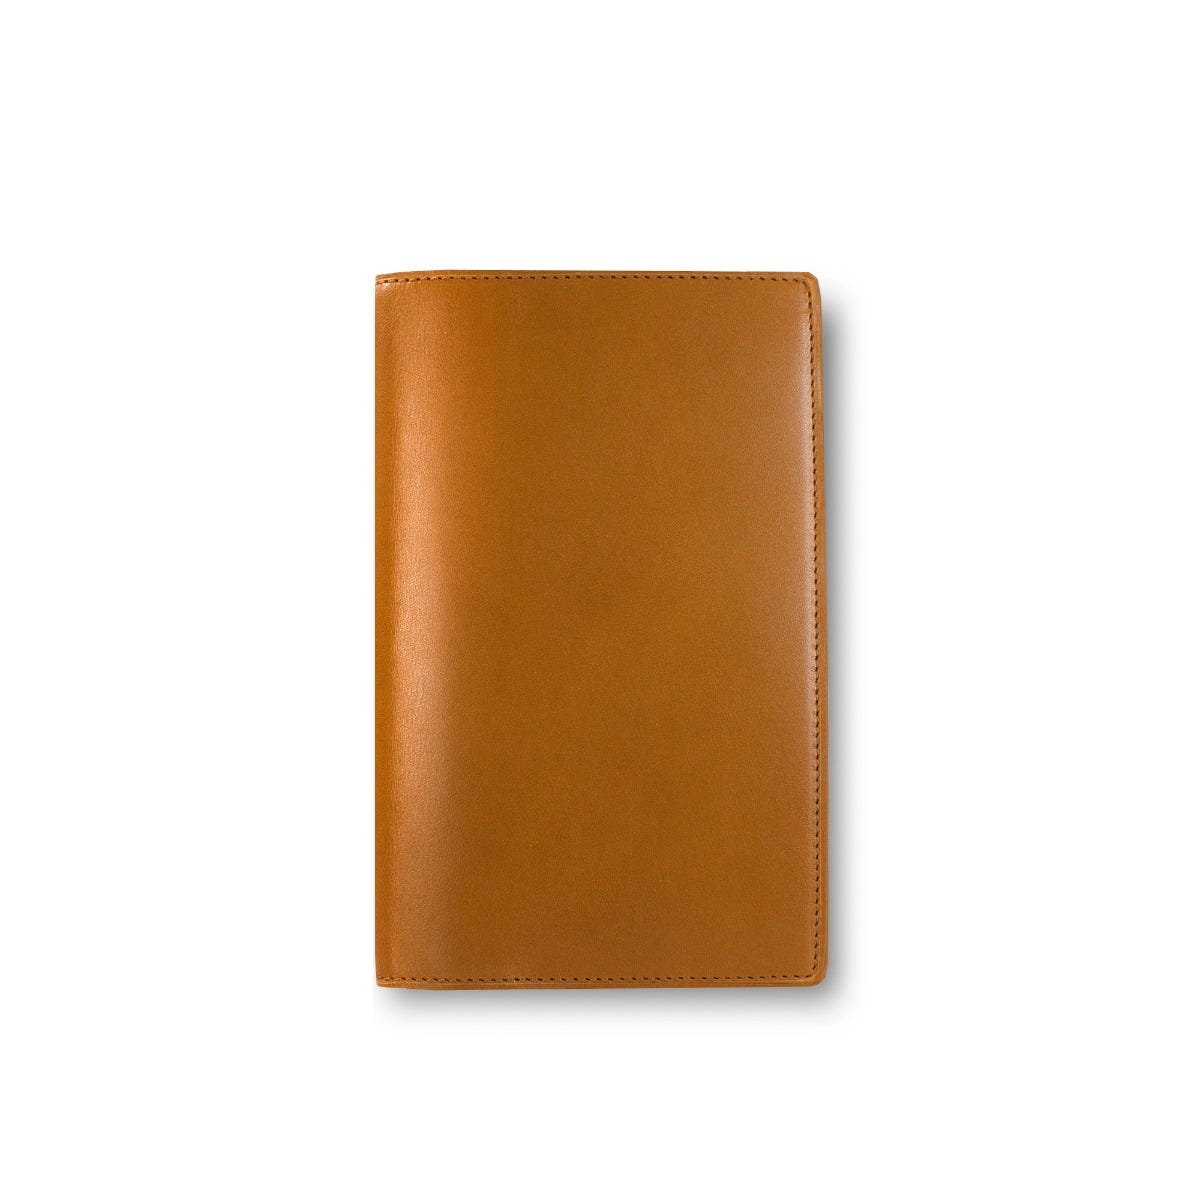 Hanover 12cc Coat Wallet in Saddle Leather